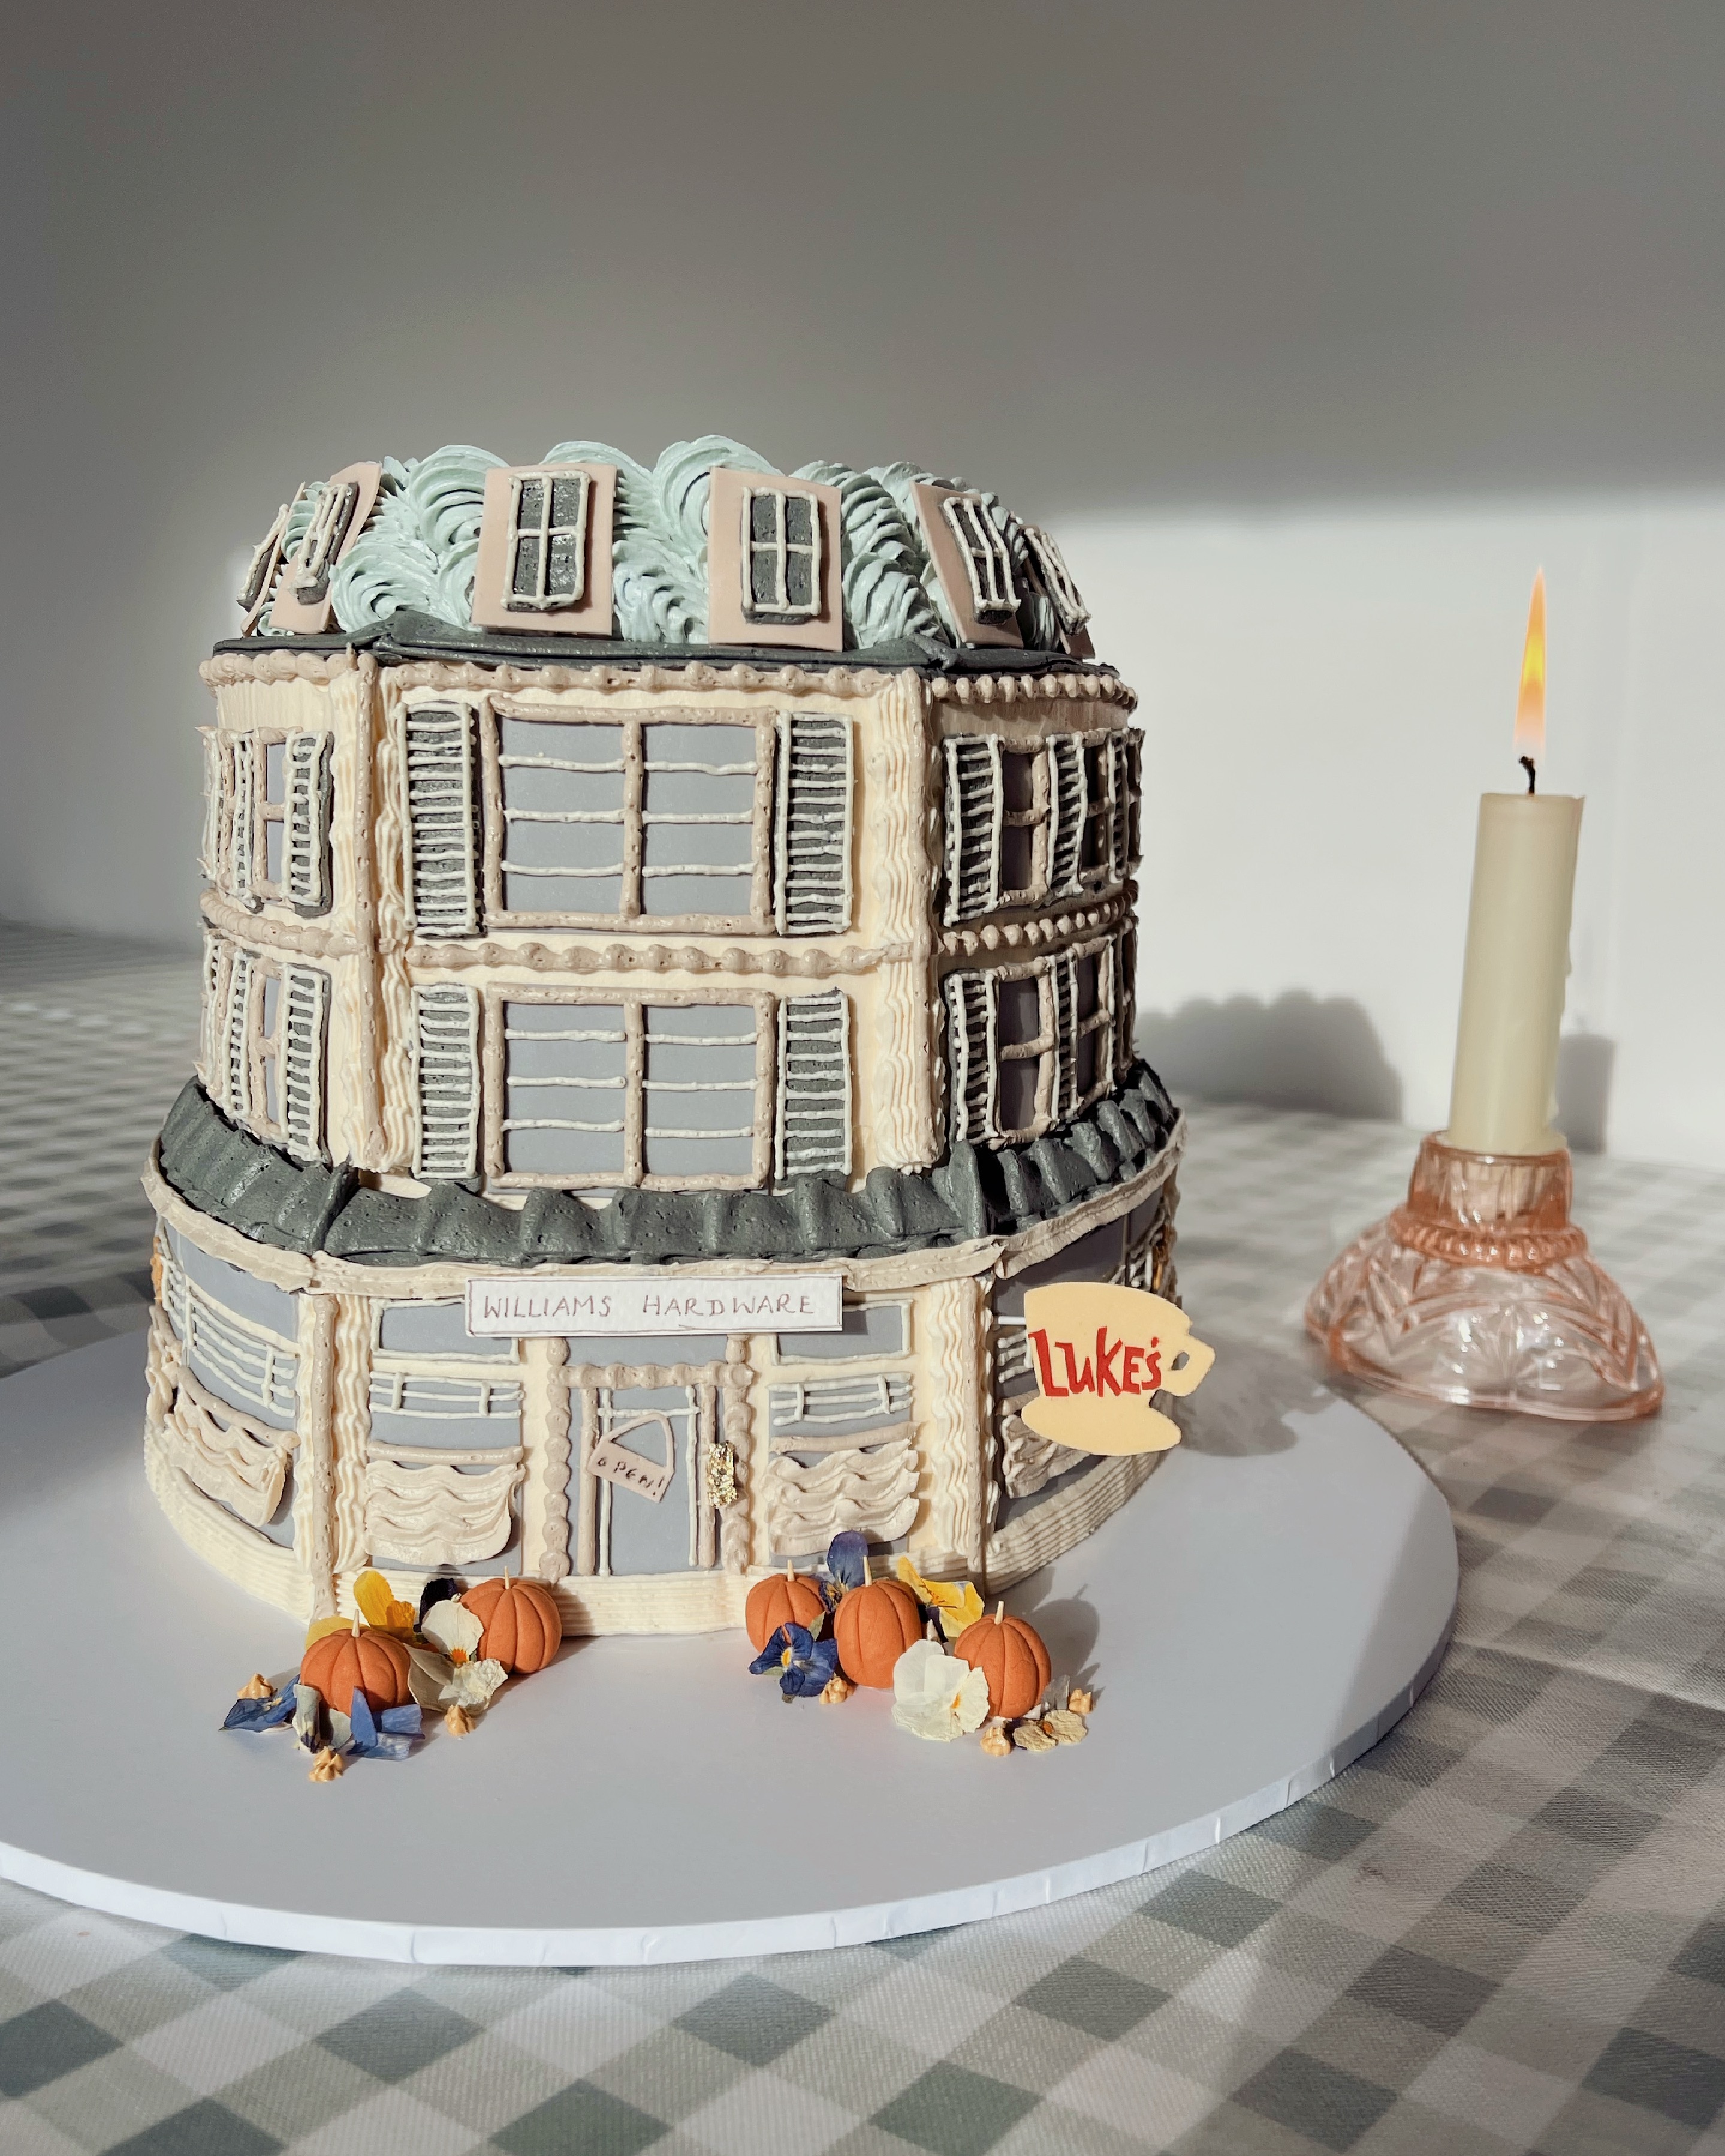 Bridie West's cake which has been designed to look like Luke's Diner from the TV show Gilmore Girls 